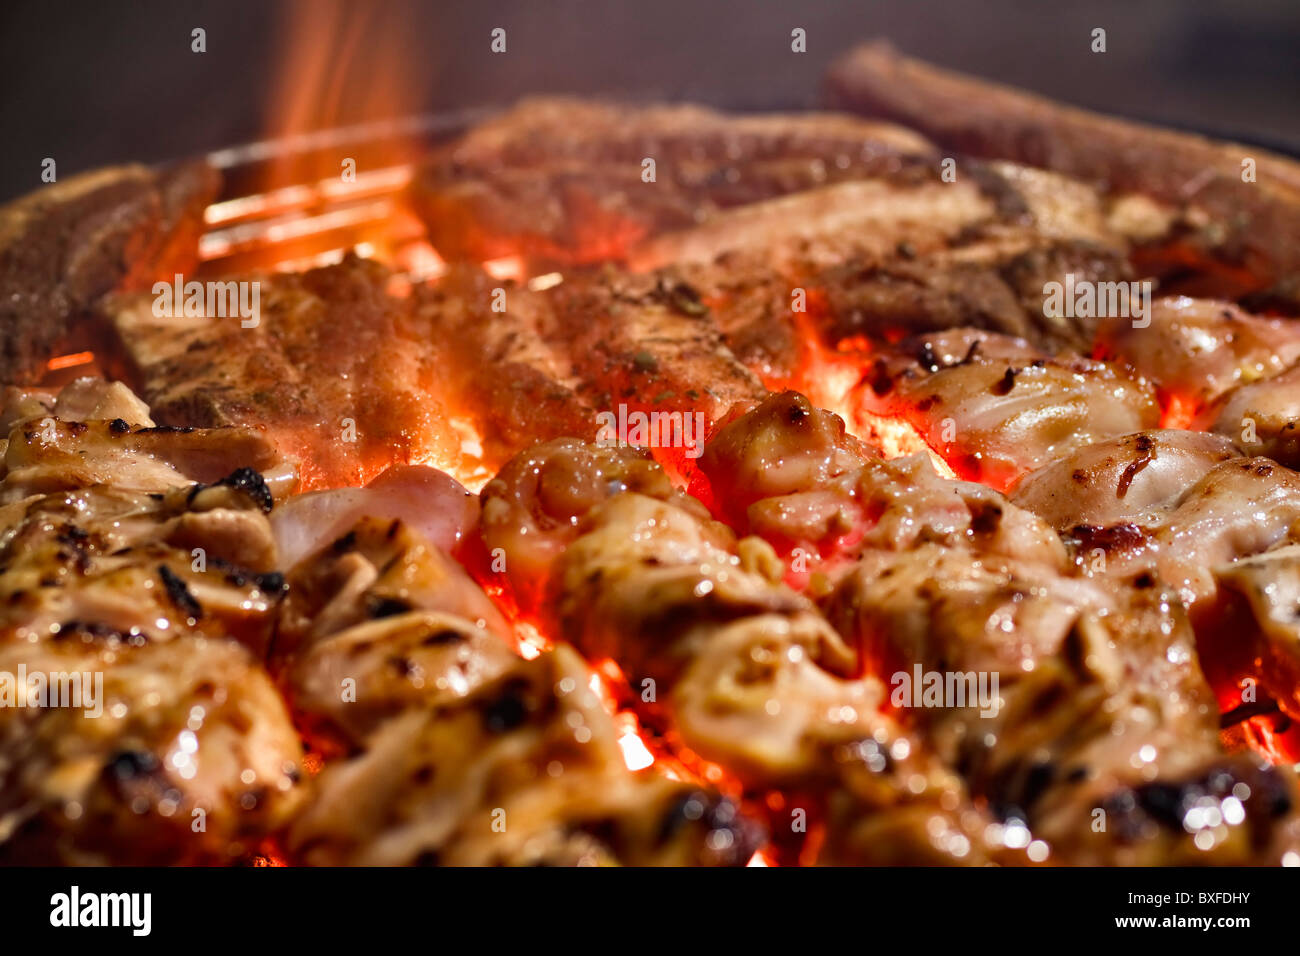 Juicy chicken shish kebabs on a charcoal barbecue grill. Stock Photo